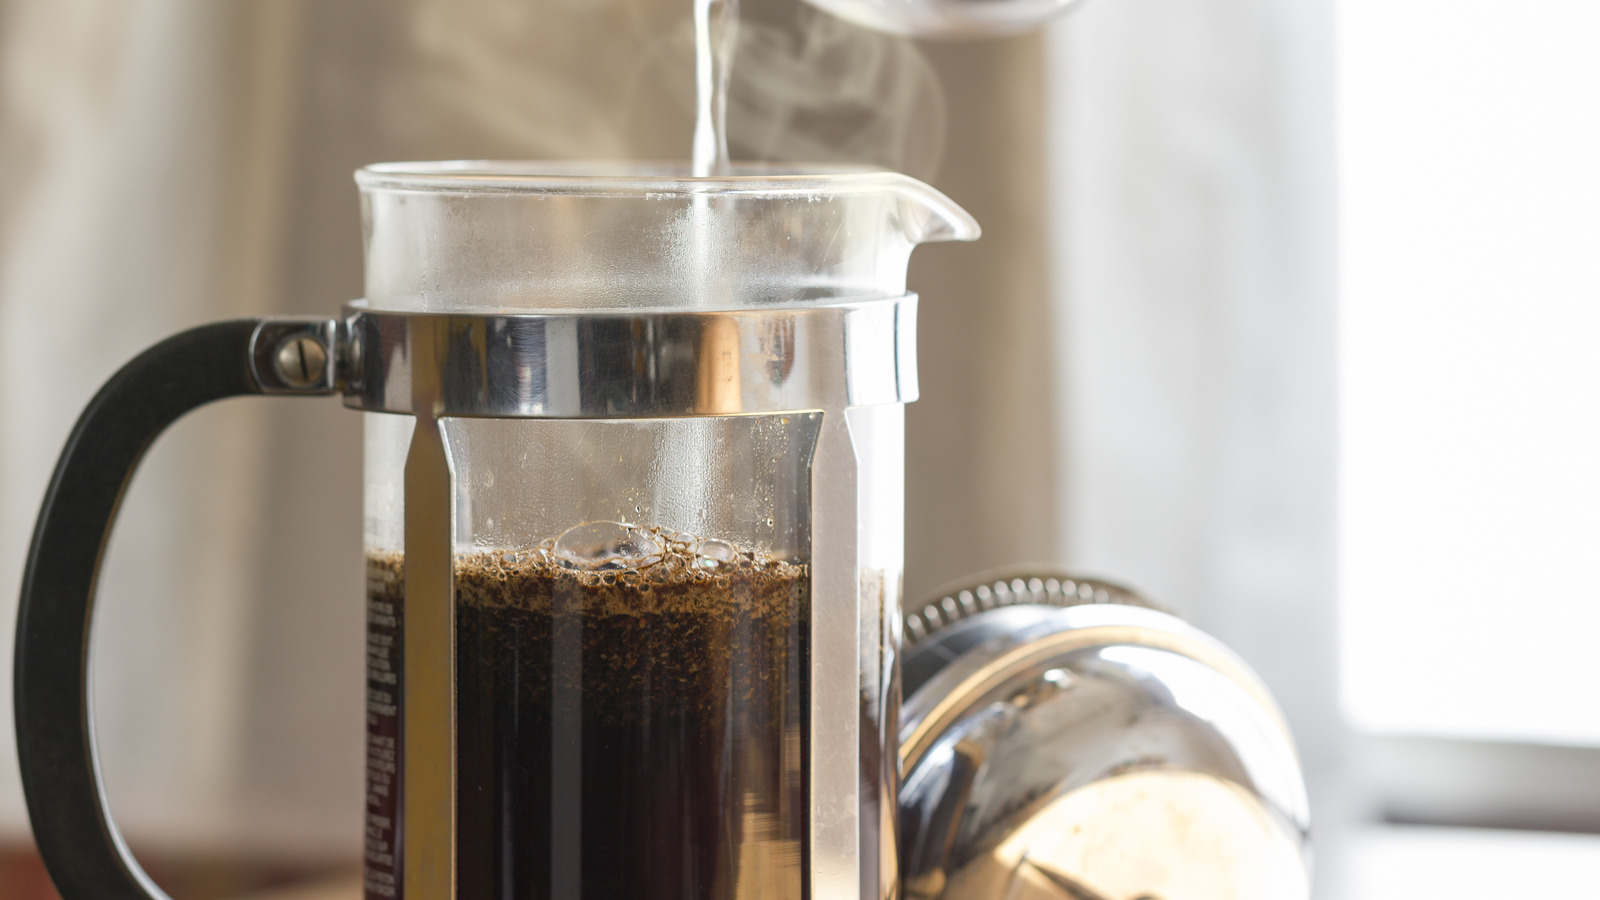 Is the iCoffee Brewer Better than French Press? - I Need Coffee